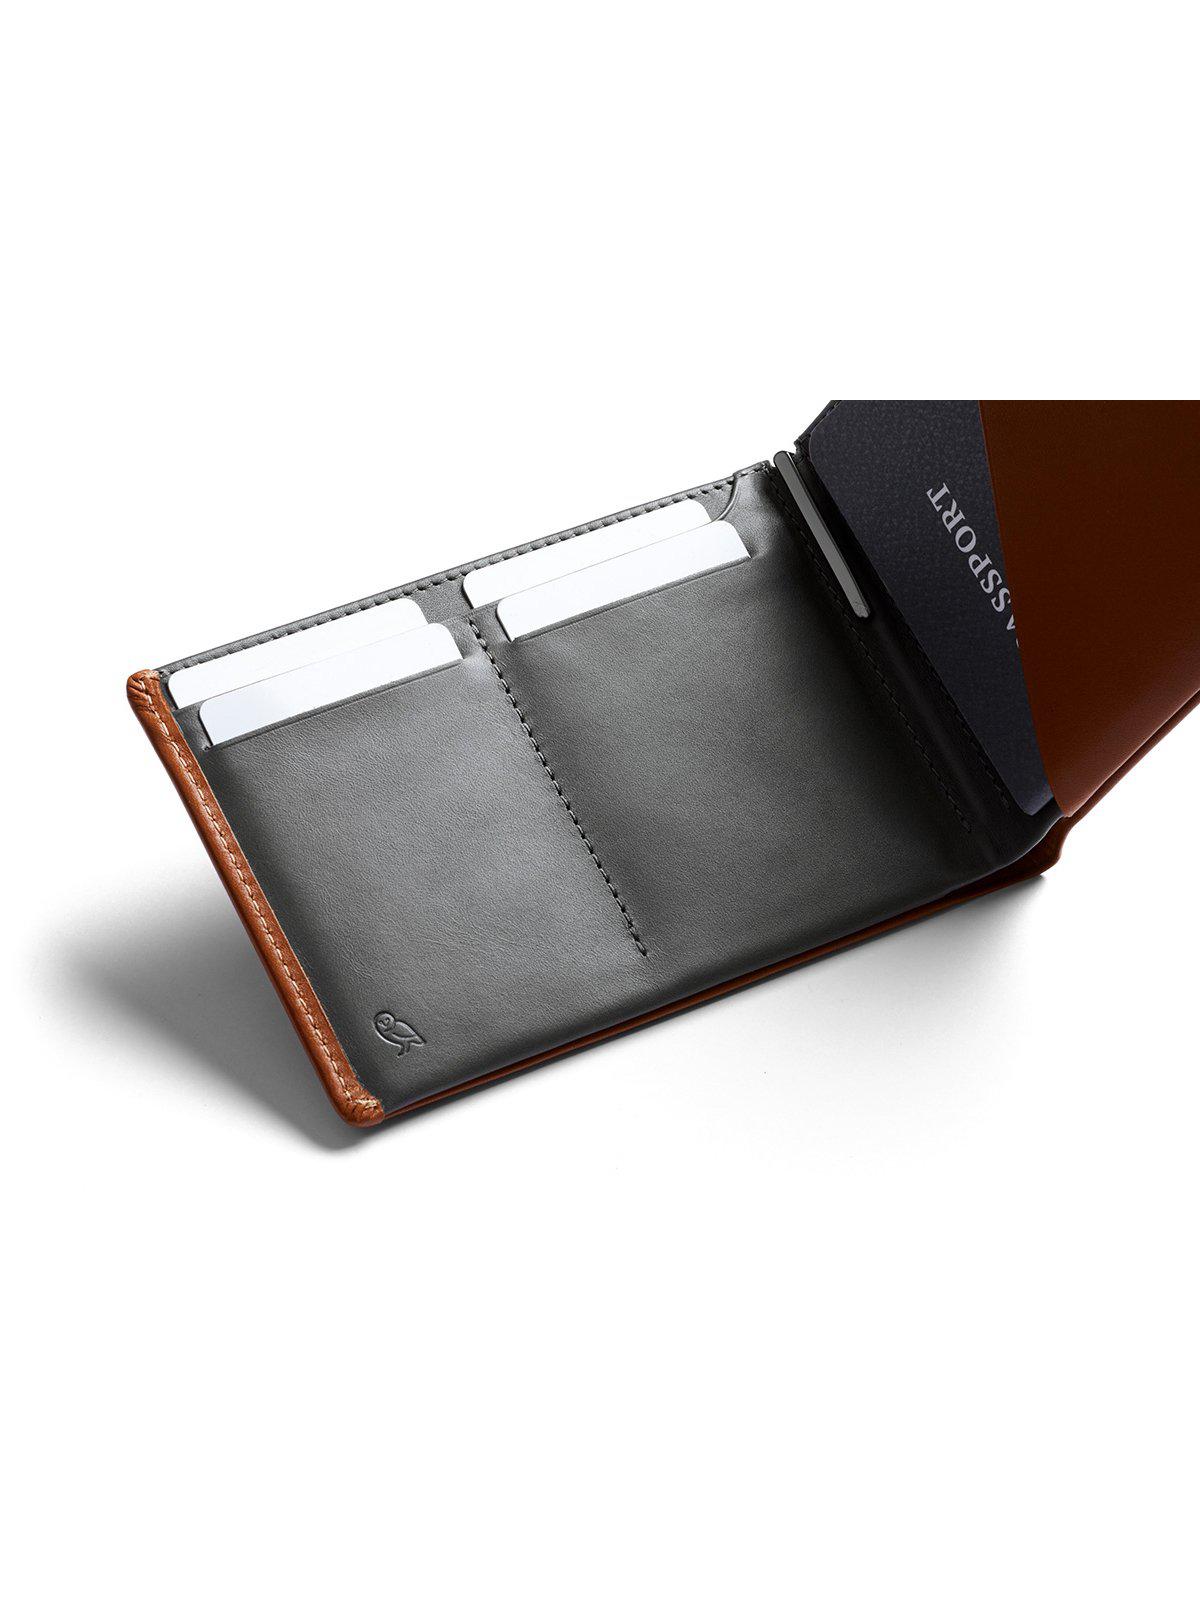 Bellroy Travel Wallet Caramel RFID - MORE by Morello Indonesia